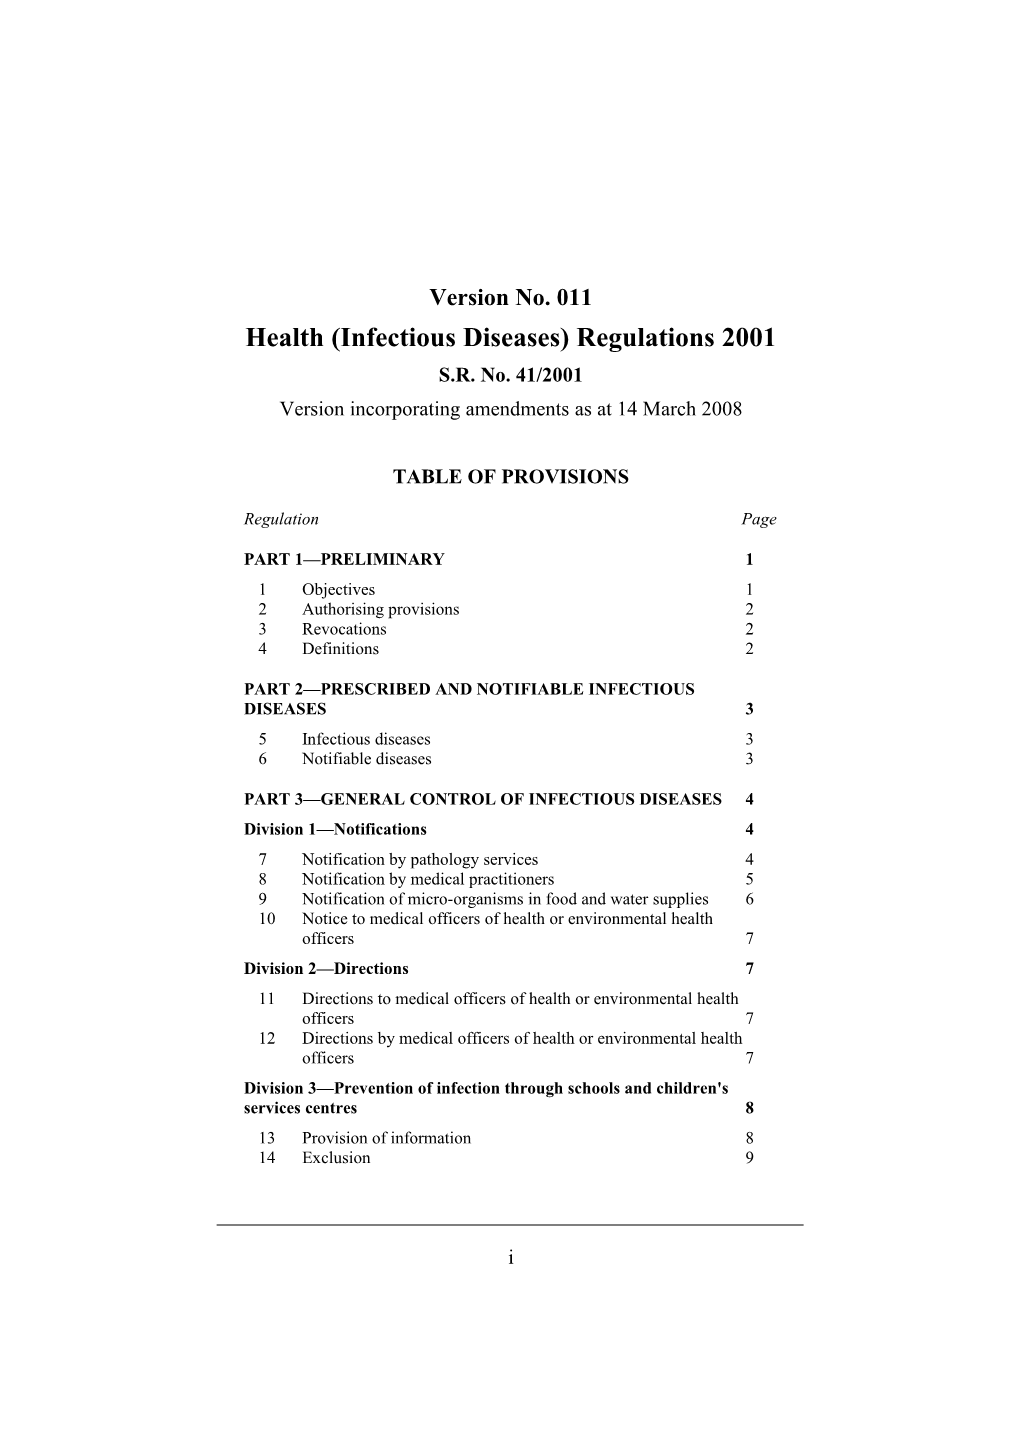 Health (Infectious Diseases) Regulations 2001